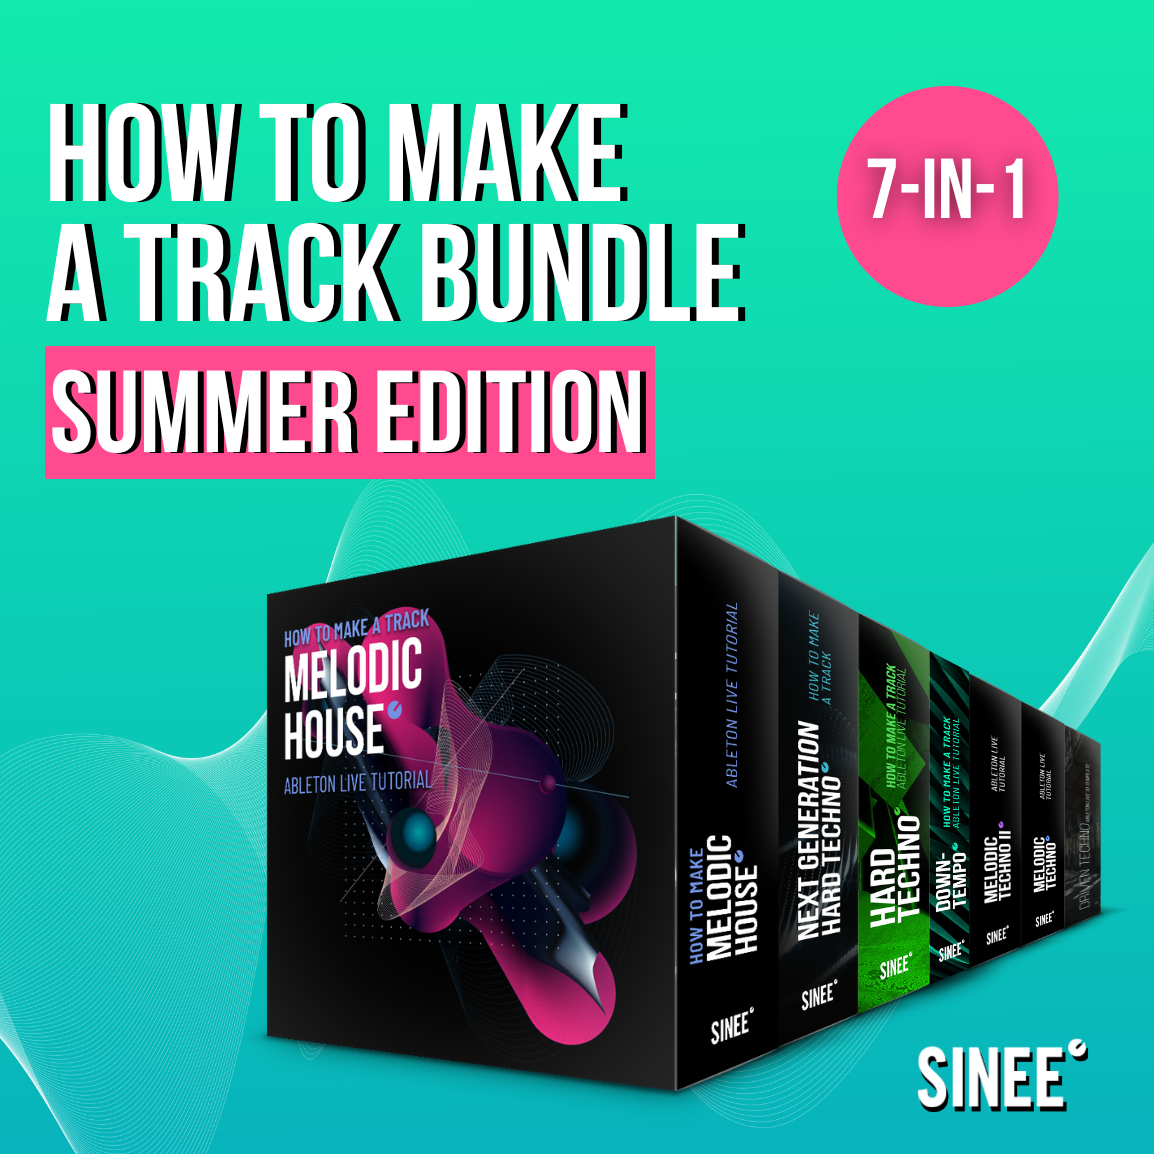 How To Make A Track Bundle - Summer Edition